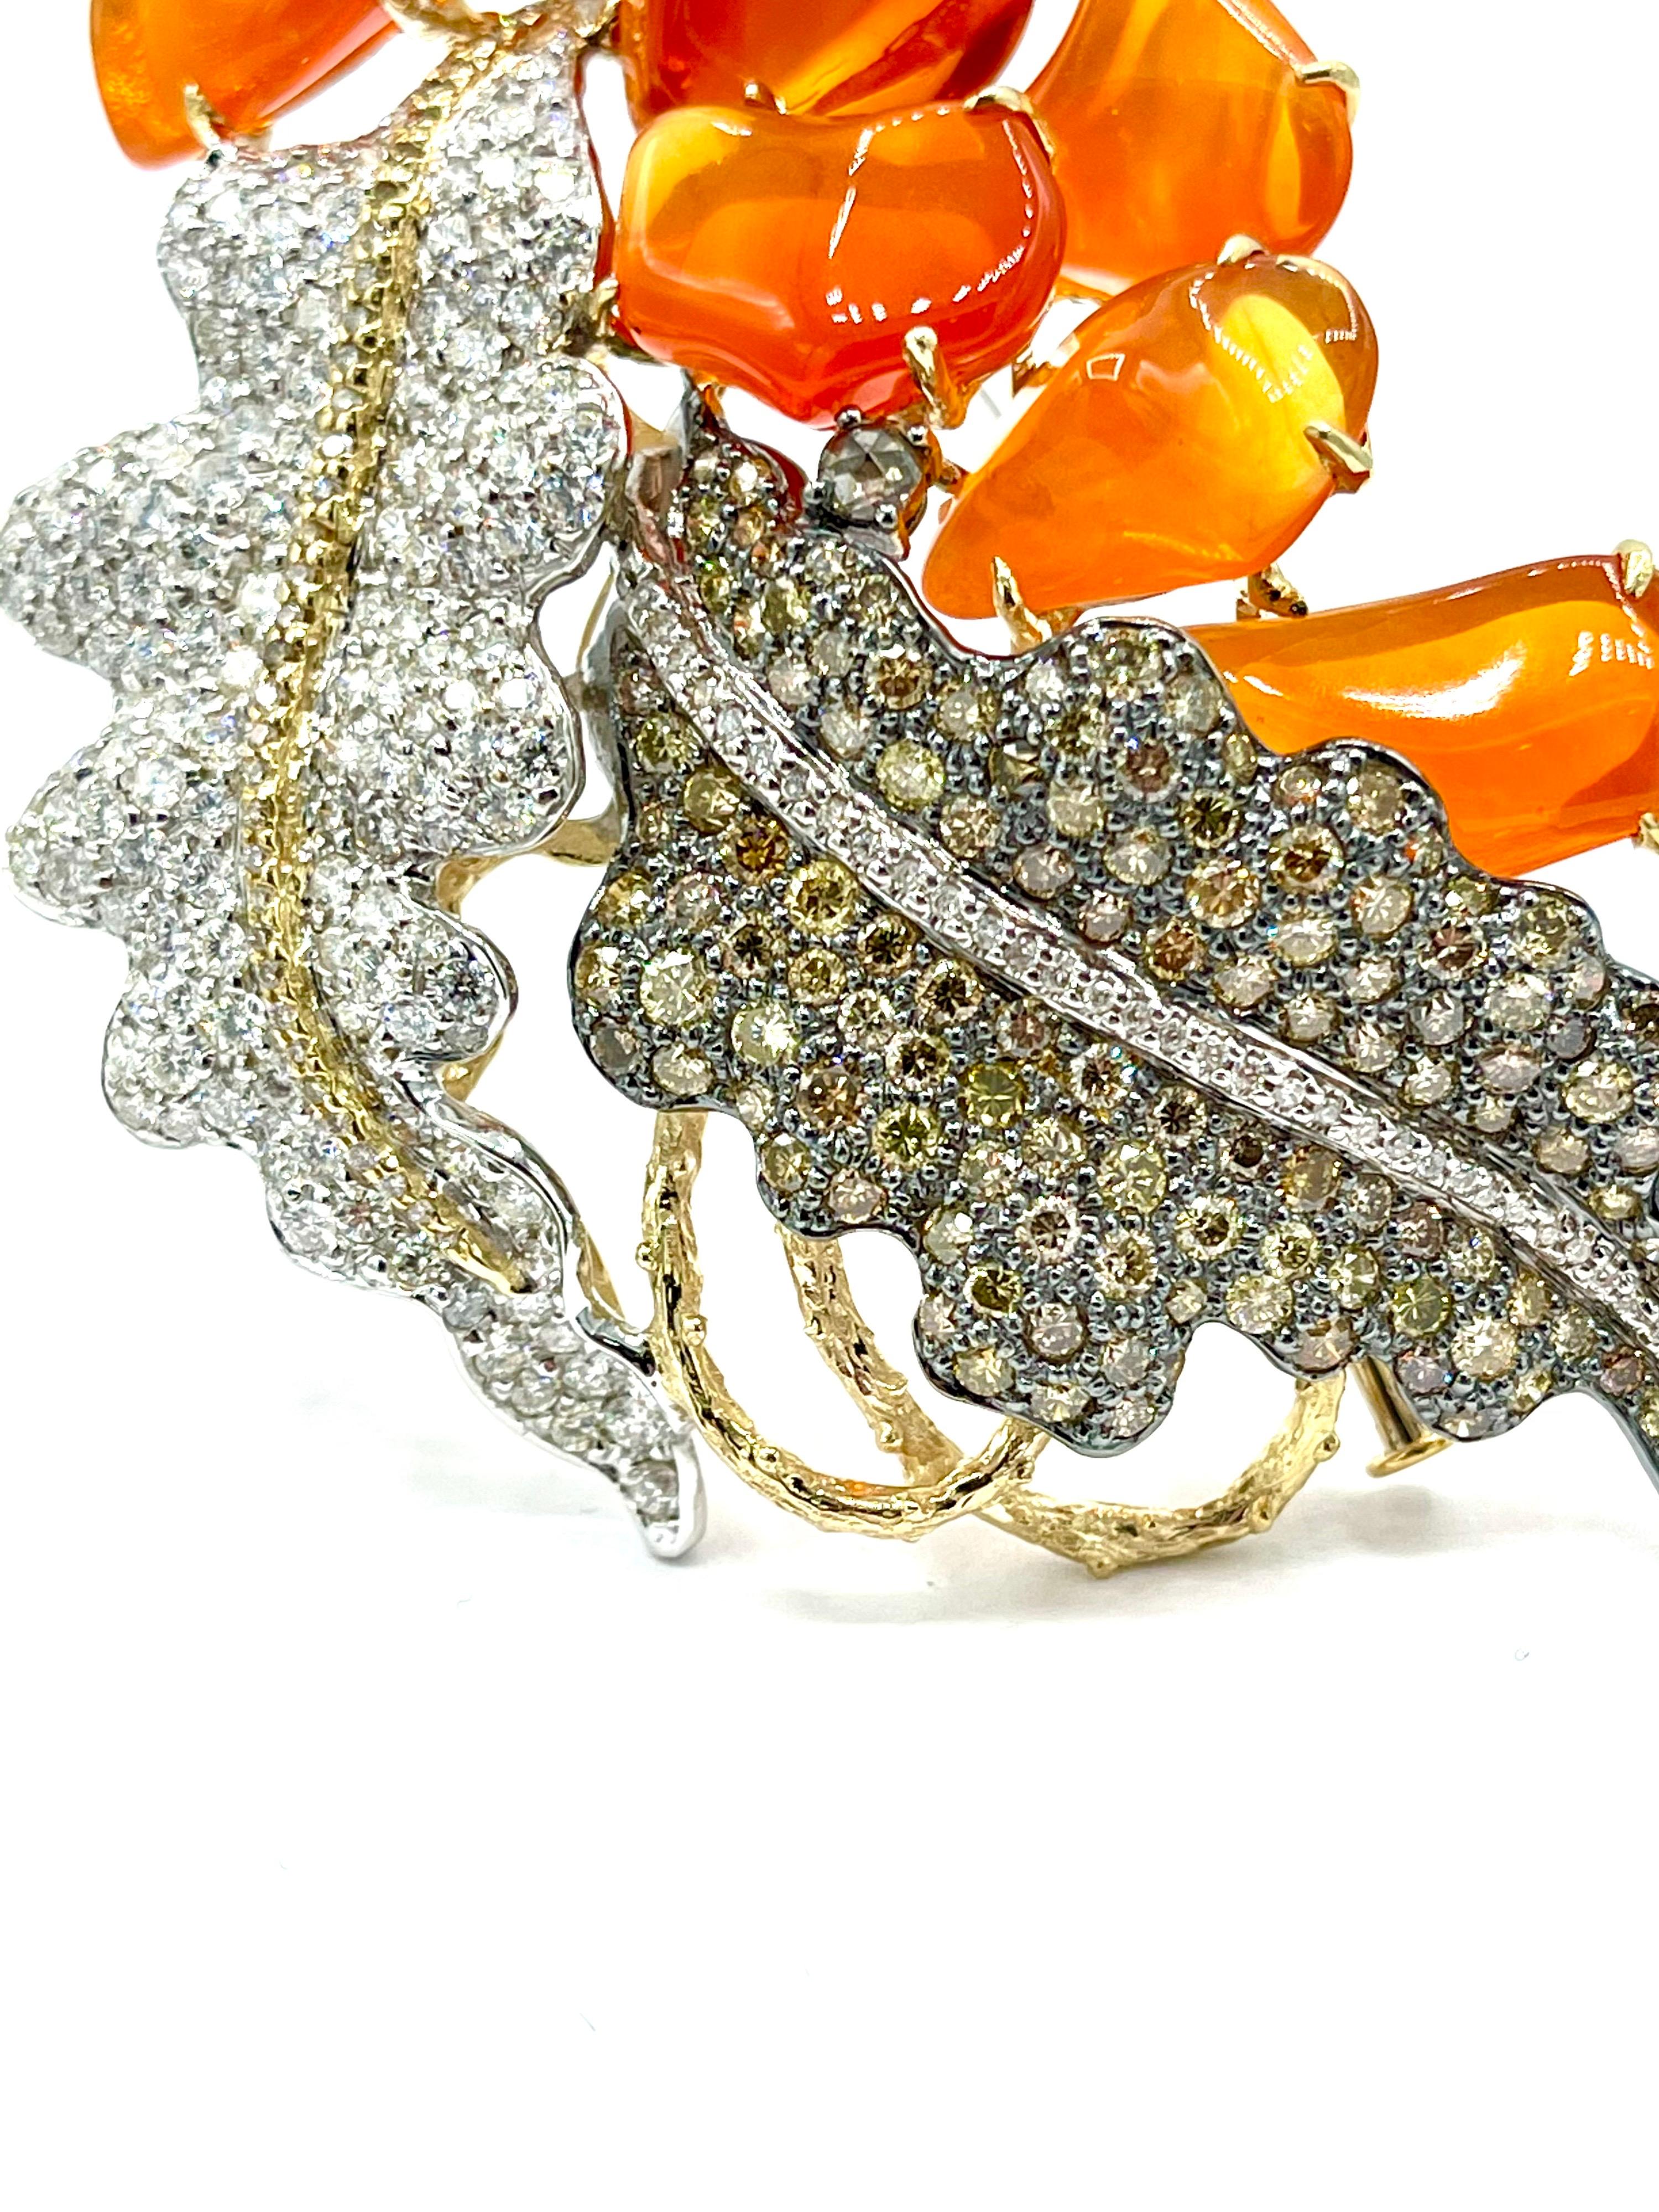 An amazing Diamond and Fire Opal pendant brooch!  The oxidized white gold leaf is pave set with a variety of colored fancy brown and fancy yellow toned round brilliant diamonds, with the polished white gold leaf pave set with round brilliant white